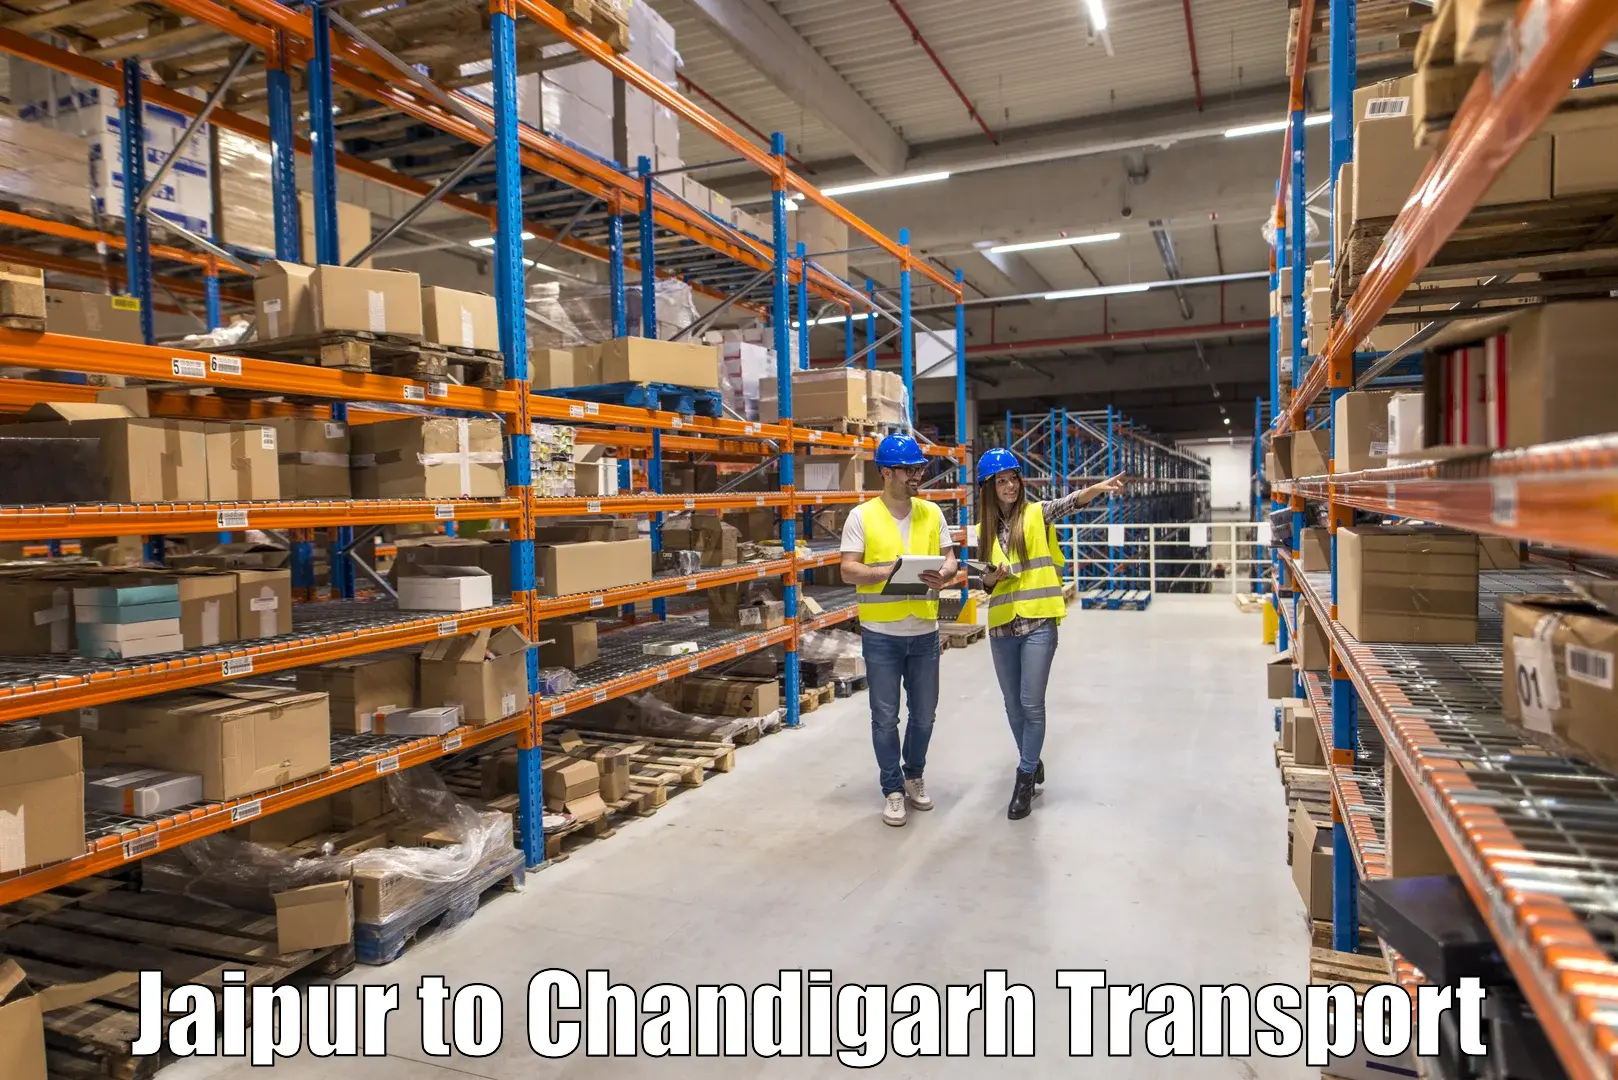 Daily parcel service transport Jaipur to Chandigarh